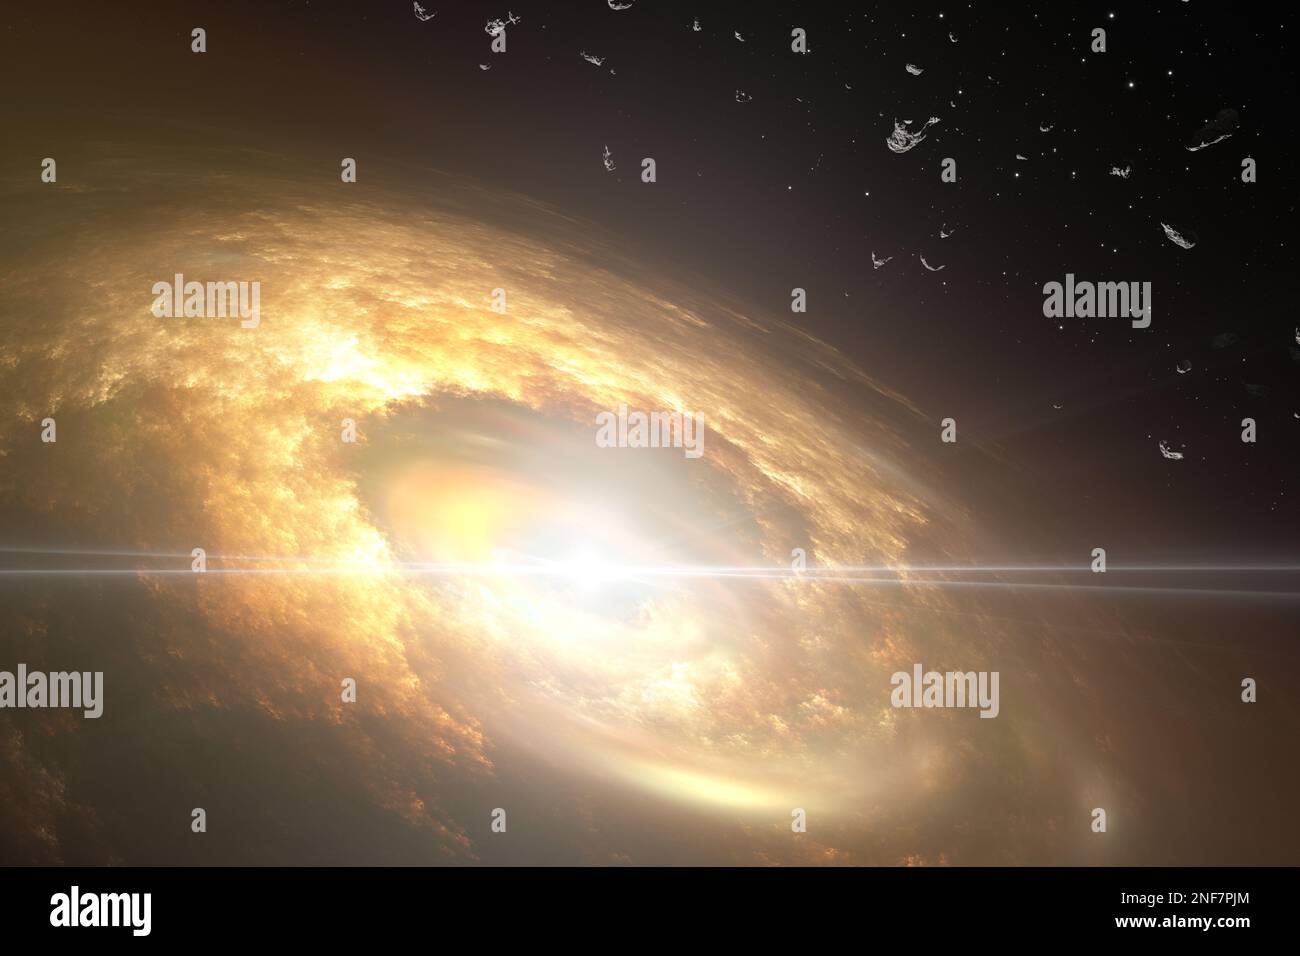 The origin of the solar system, protoplanetary disk. 3D illustration Stock Photo